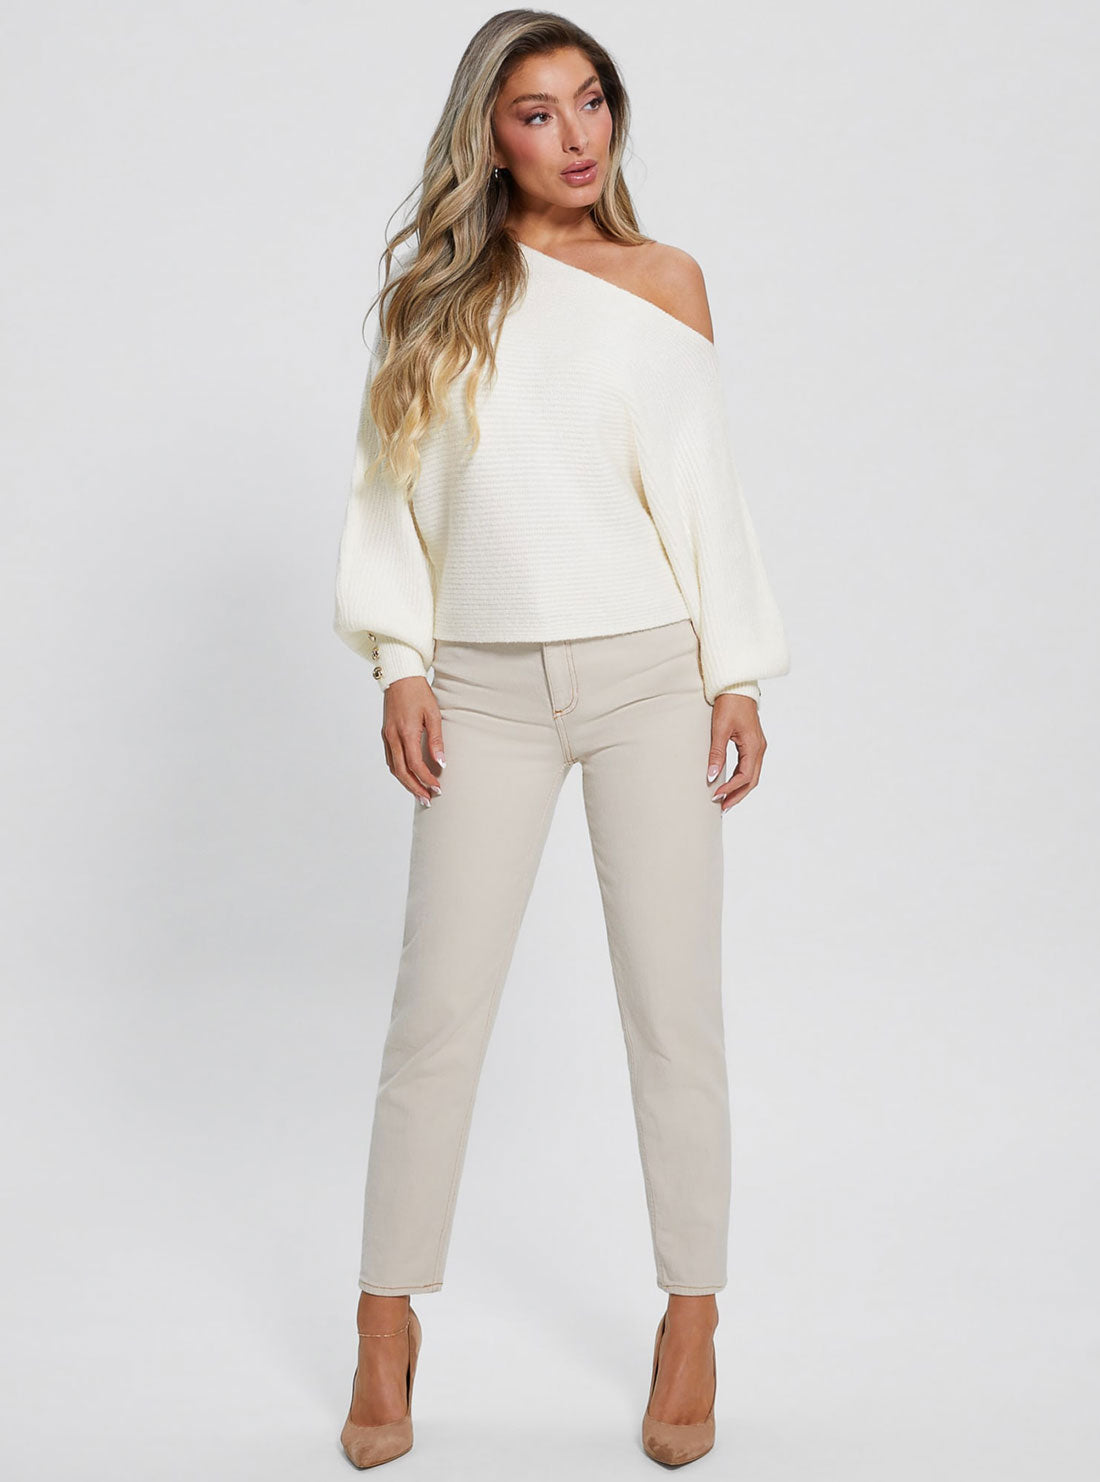 White Isadora Off-Shoulder Knit Top | GUESS Women's Apparel | full view